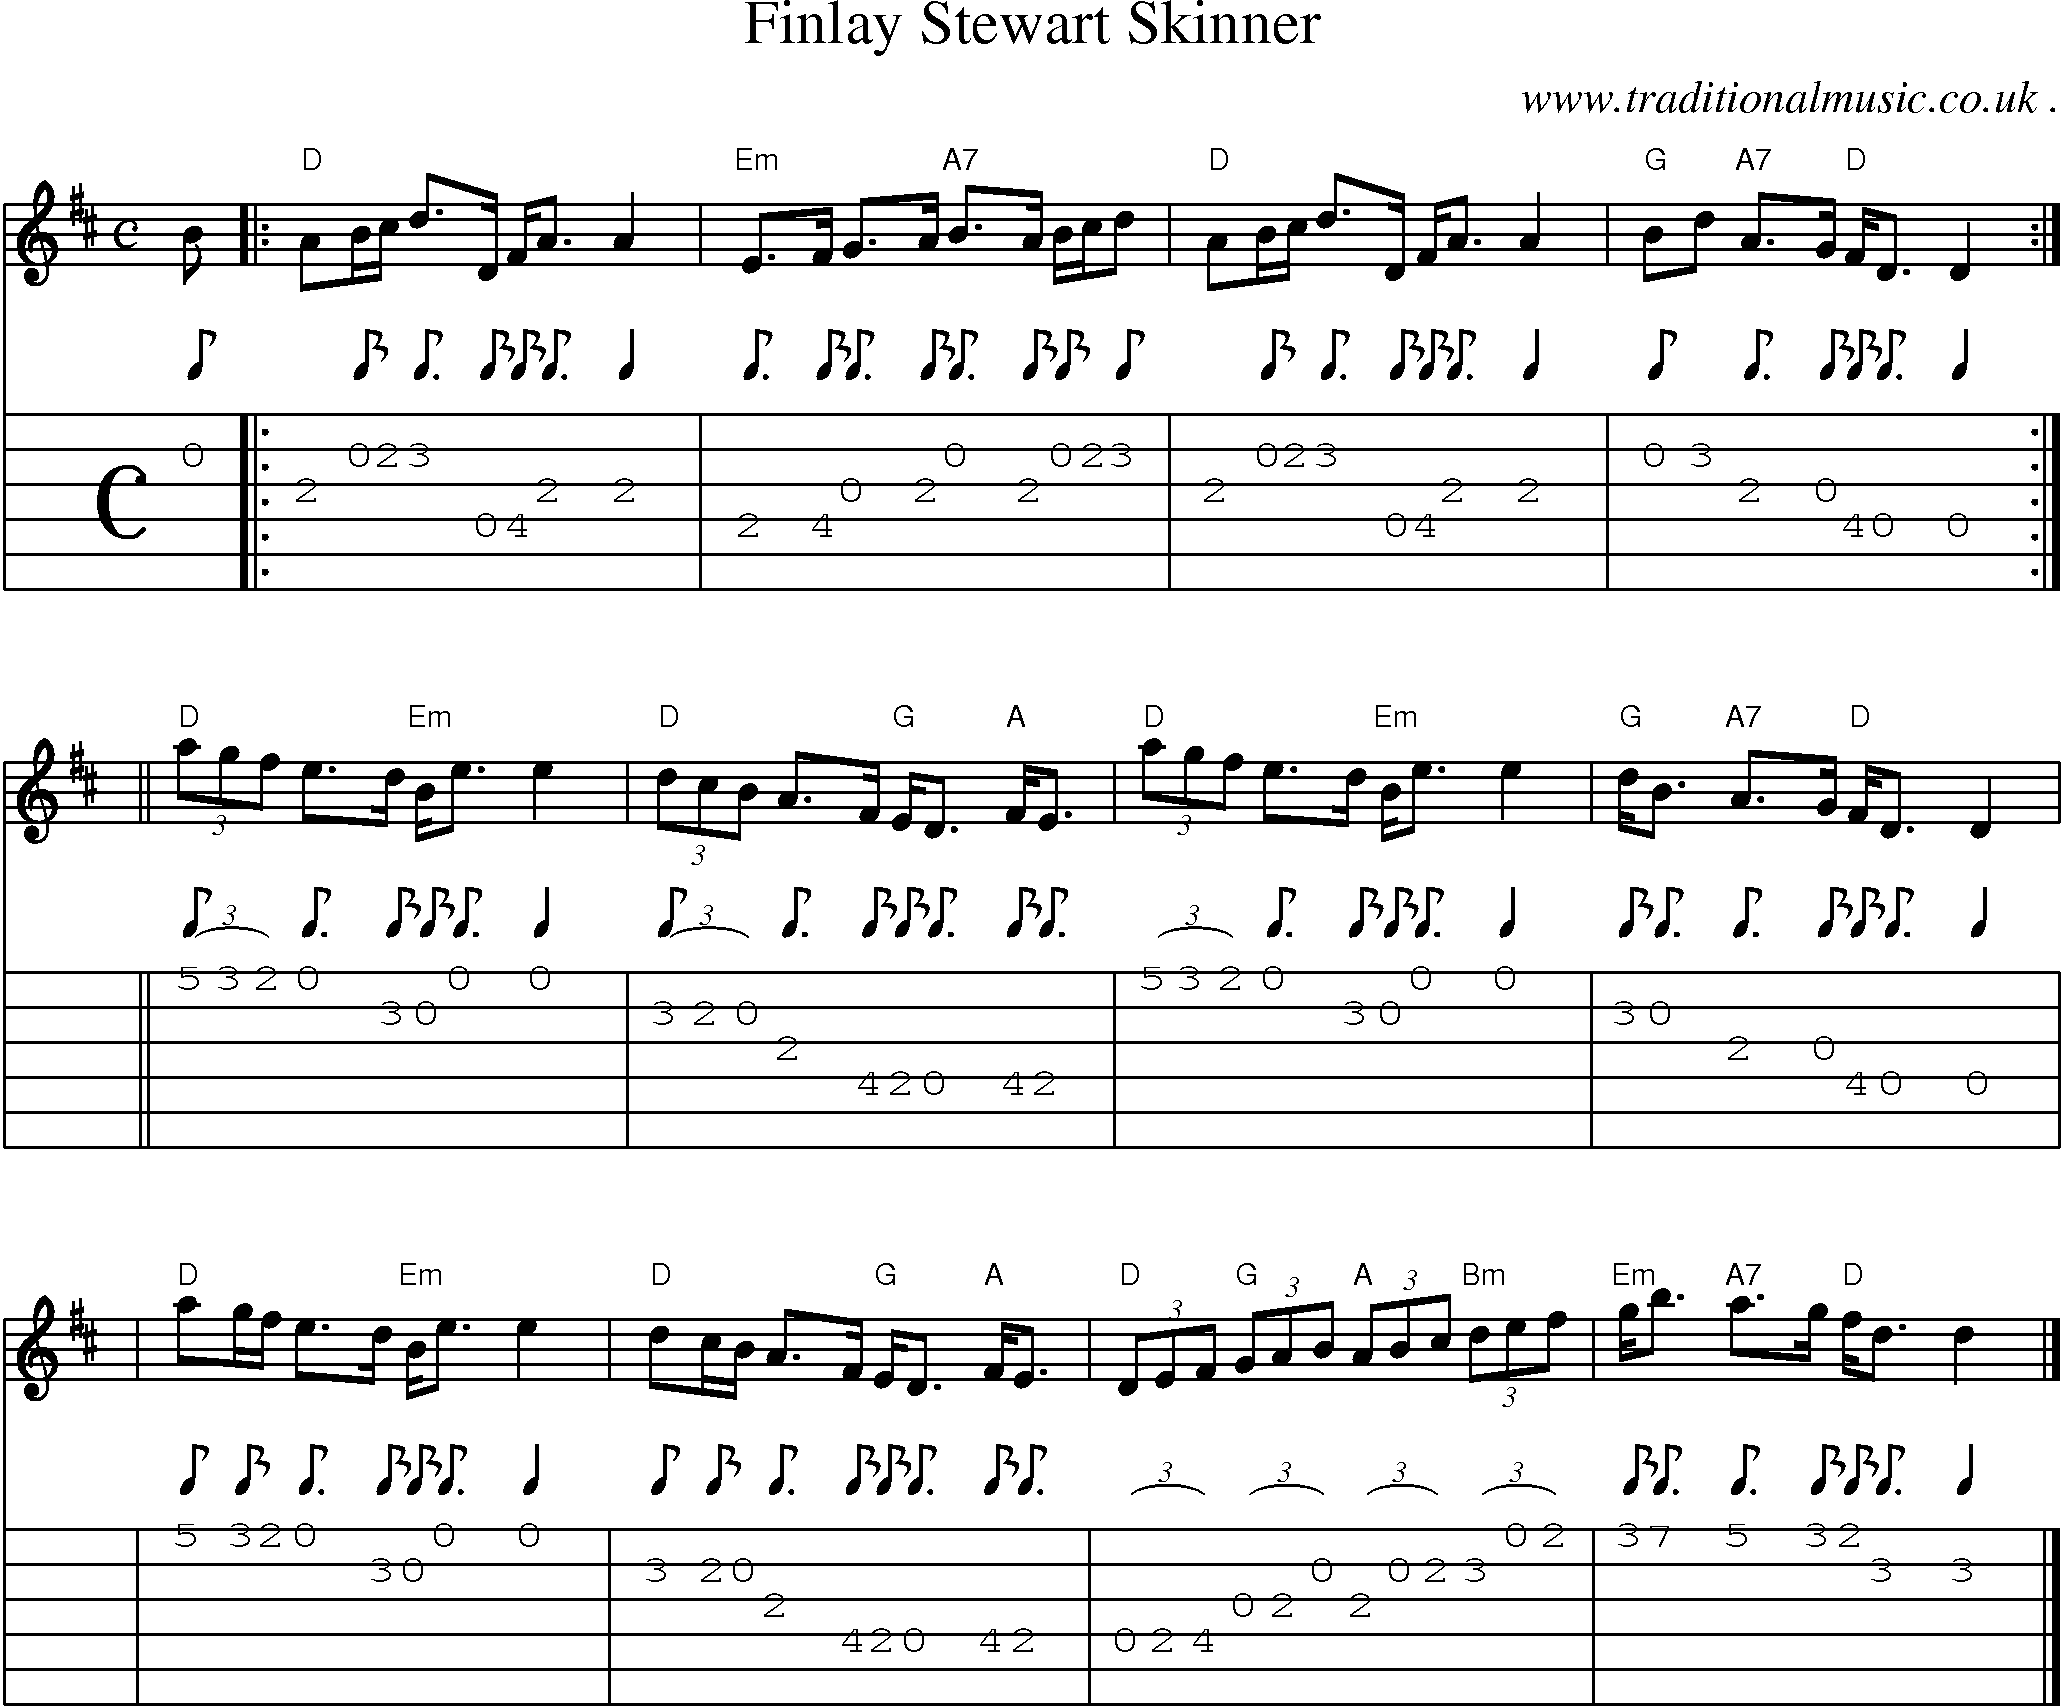 Sheet-music  score, Chords and Guitar Tabs for Finlay Stewart Skinner